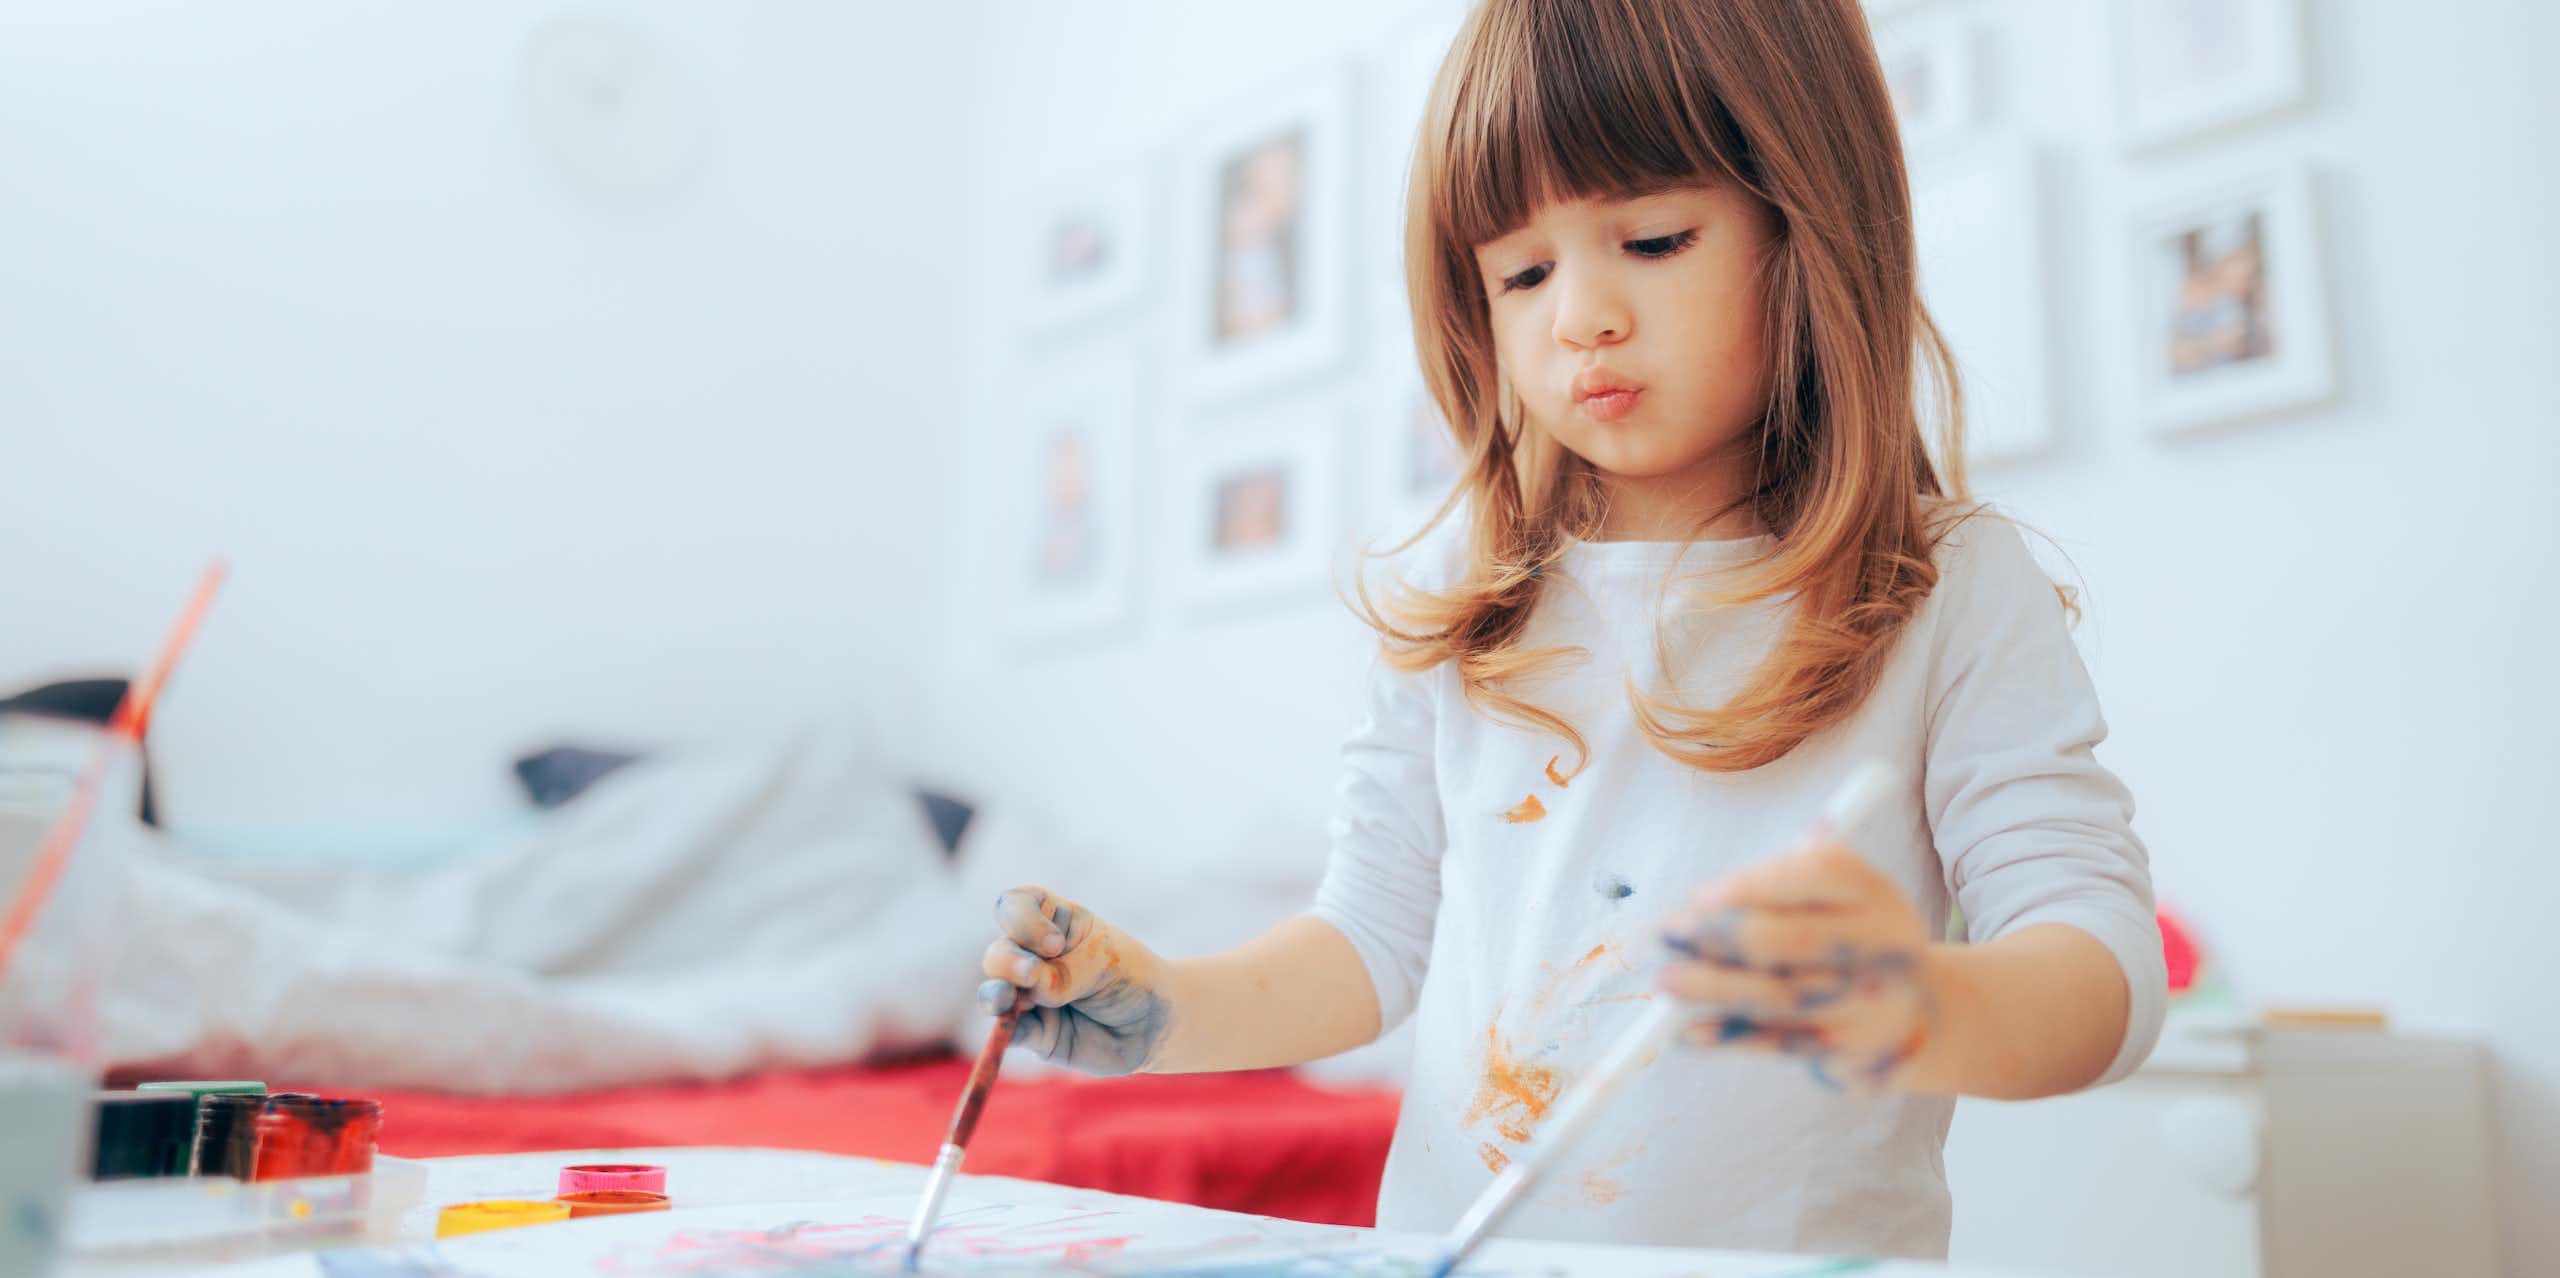 Girl painting with both hands